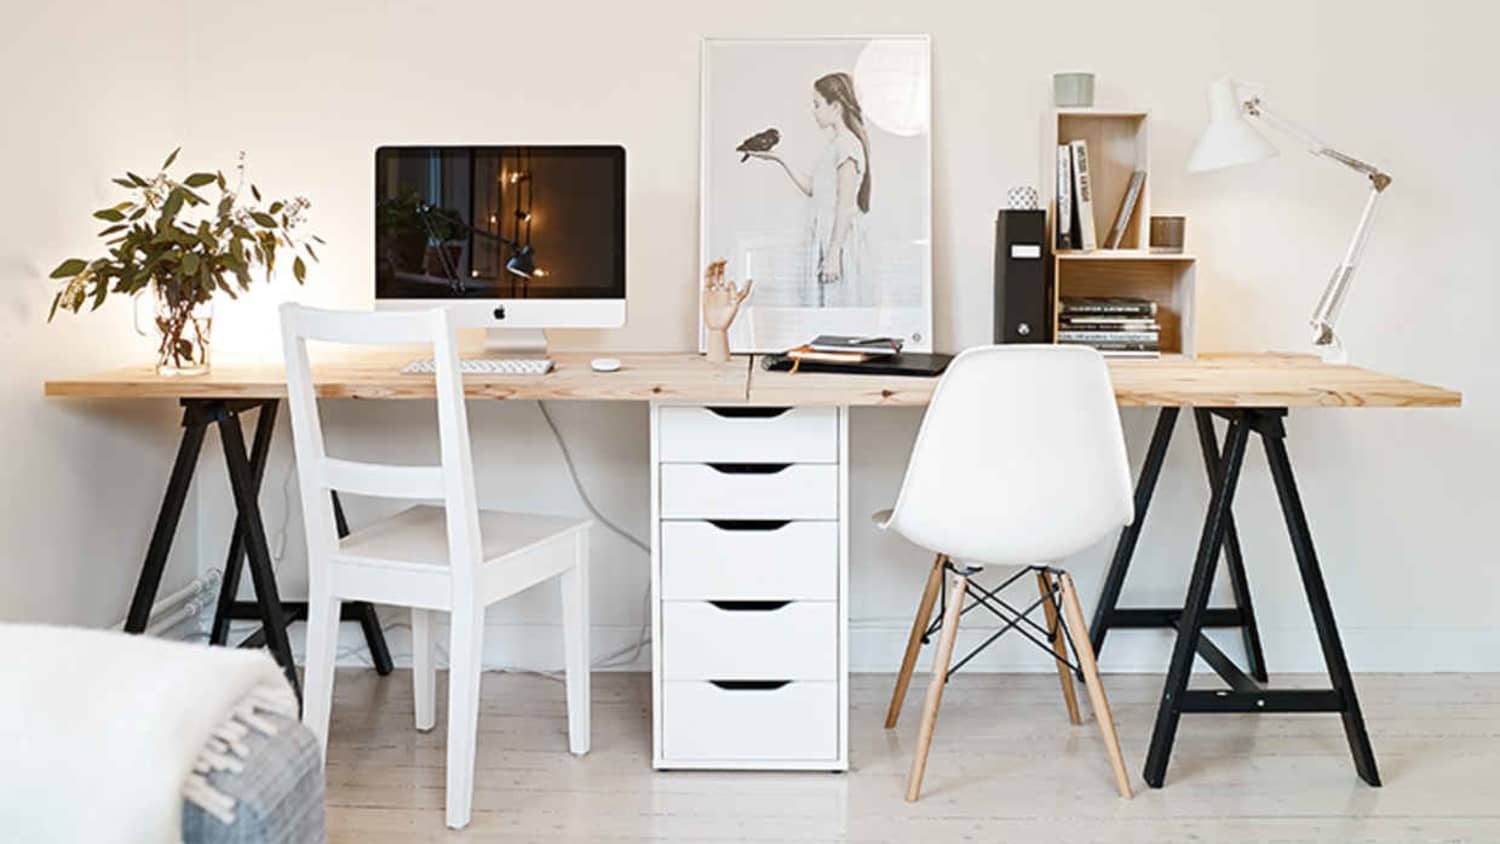 DIY Storage Desk For Home Office --Building Plans and Tutorial